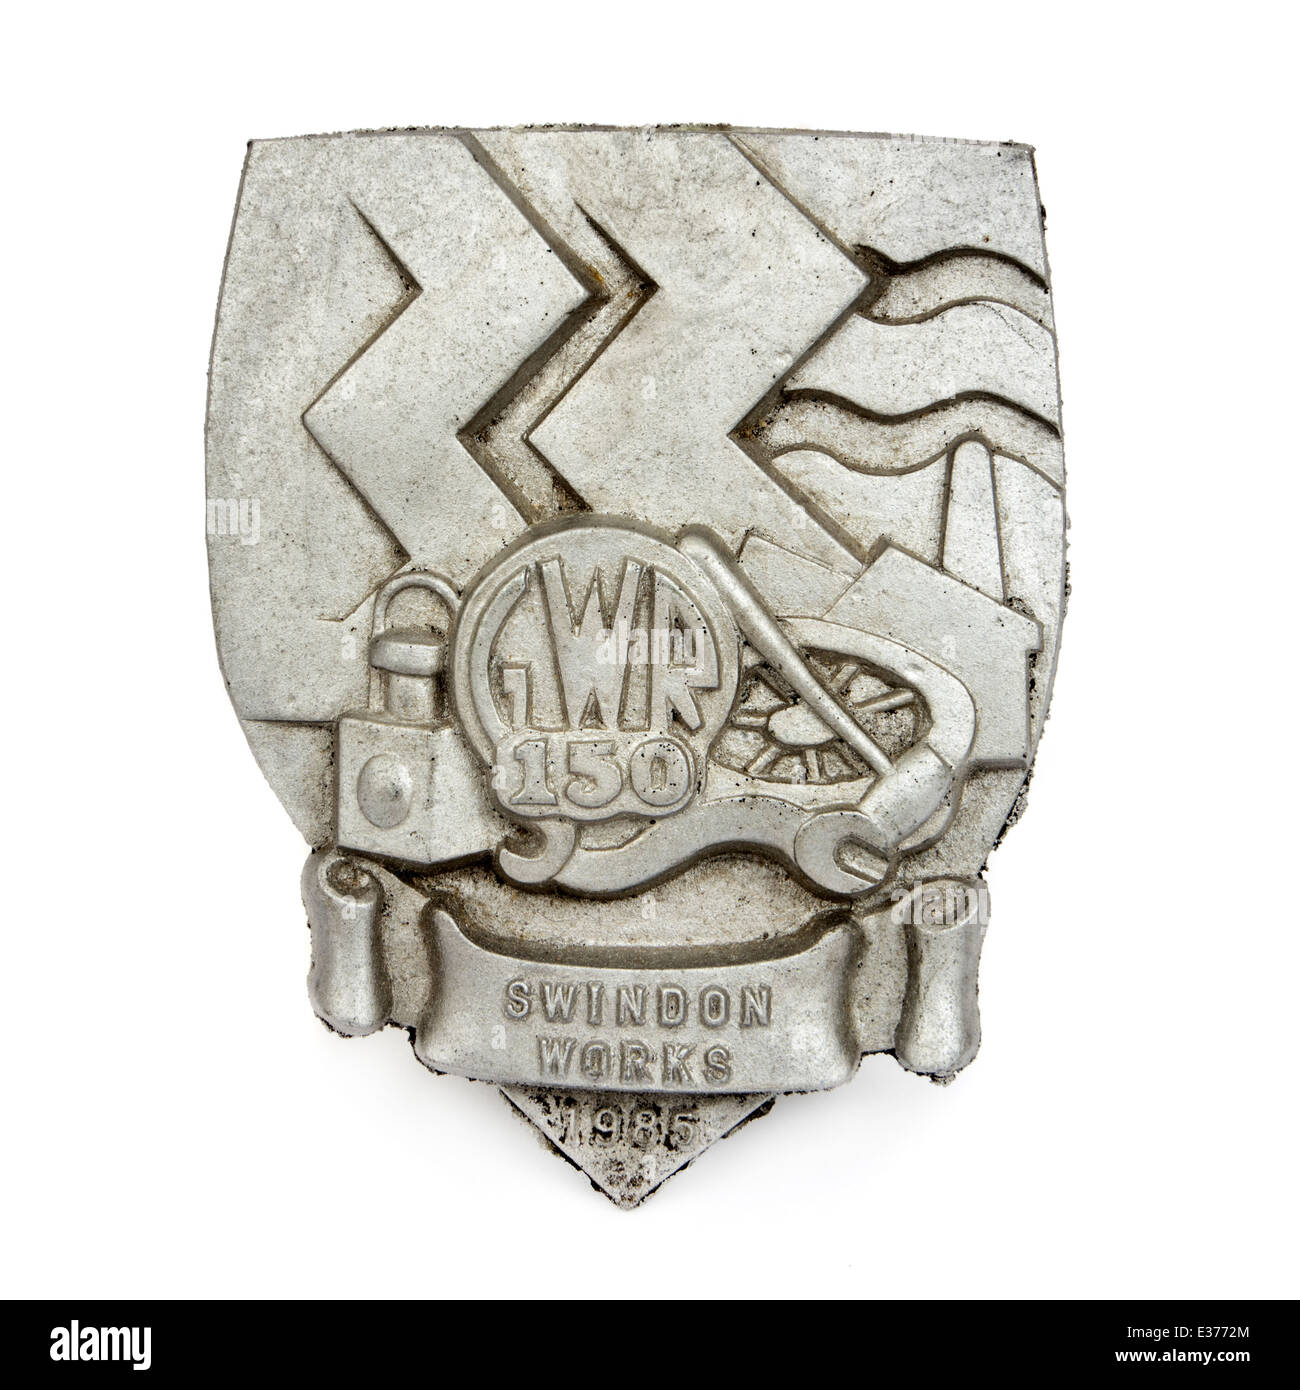 Placque made in the Swindon GWR factory in 1985 commemorating the 150th anniversary of the Great Western Railway (GWR). Stock Photo